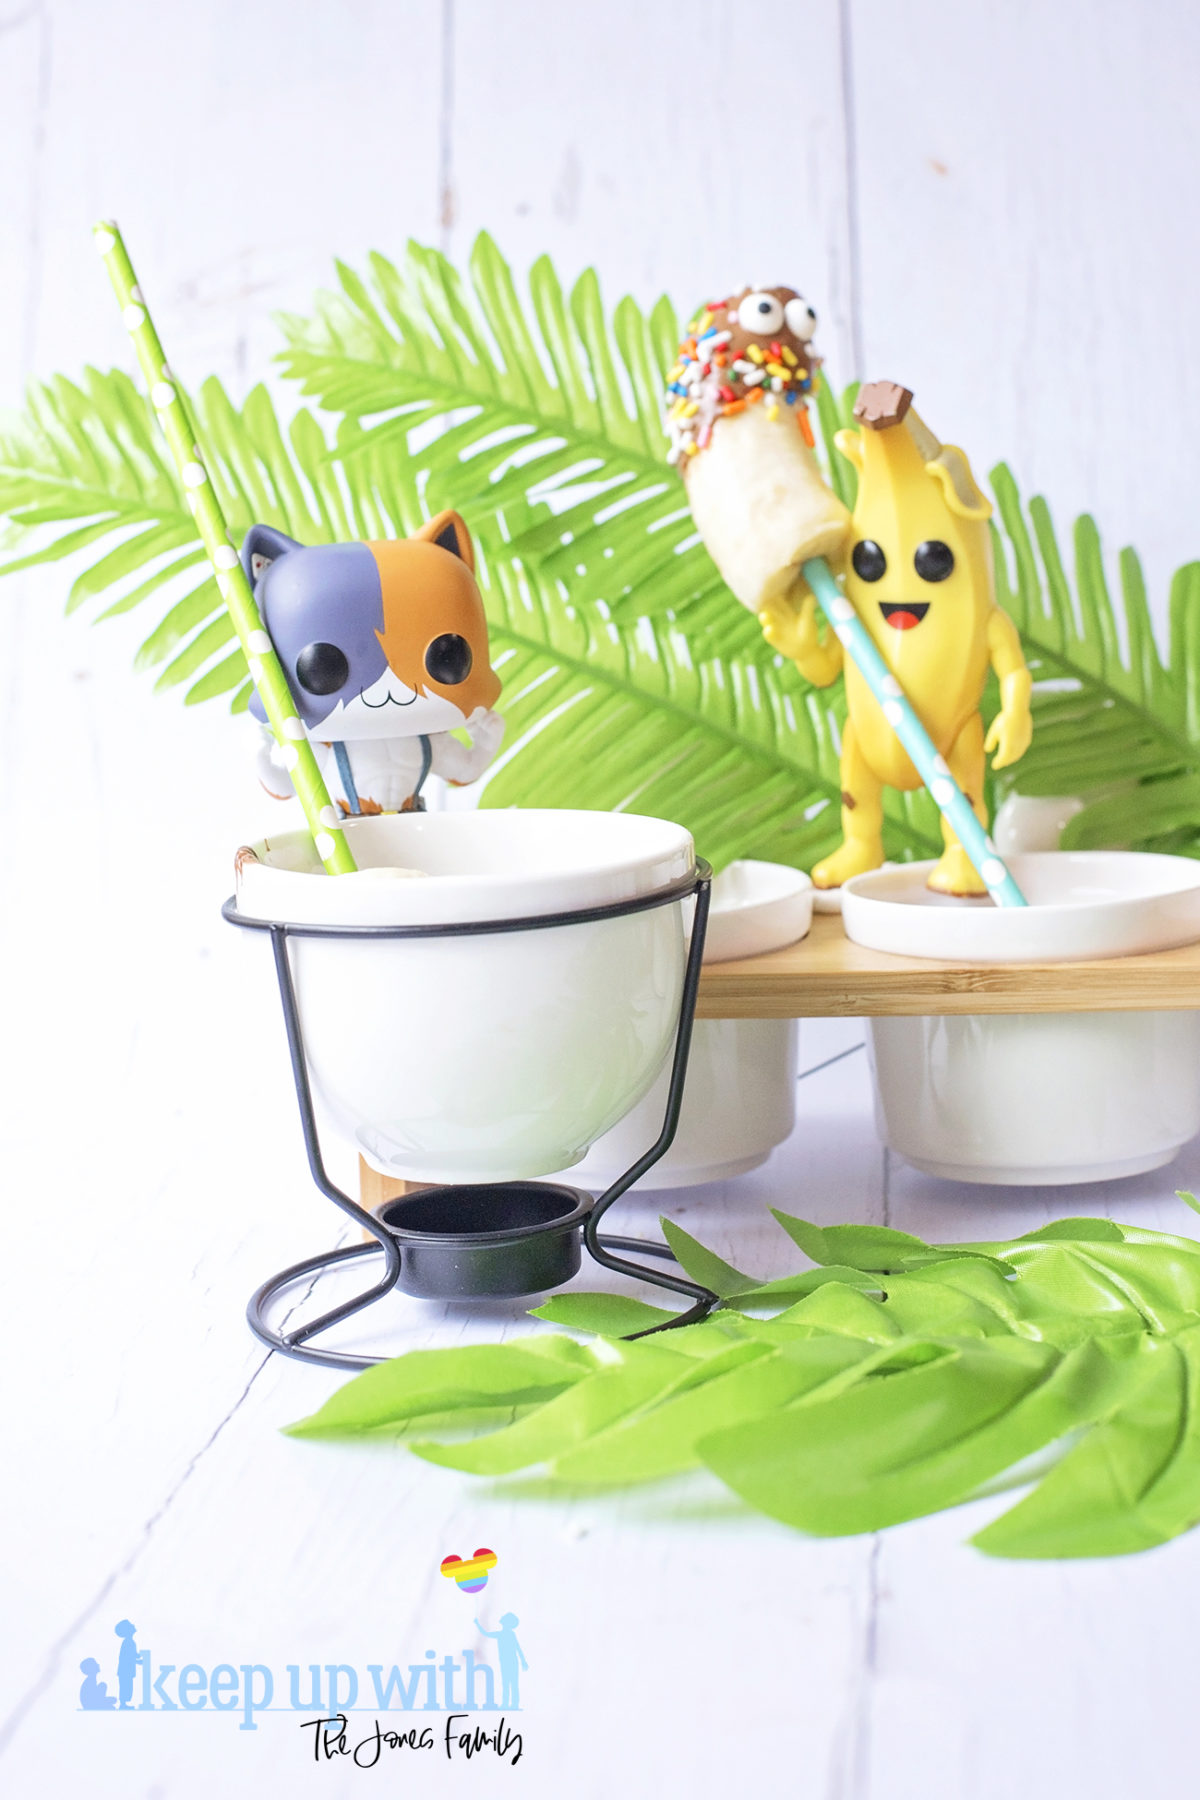 Image shows Peely’s Banana Fortnite Fondue Bar, fun food for families. A Funko Pop Vinyl Peely and Meowscles stand on a fondue bar stirring chocolate with bananas on sticks. Image by Sara-Jayne from Keep Up With The Jones Family.